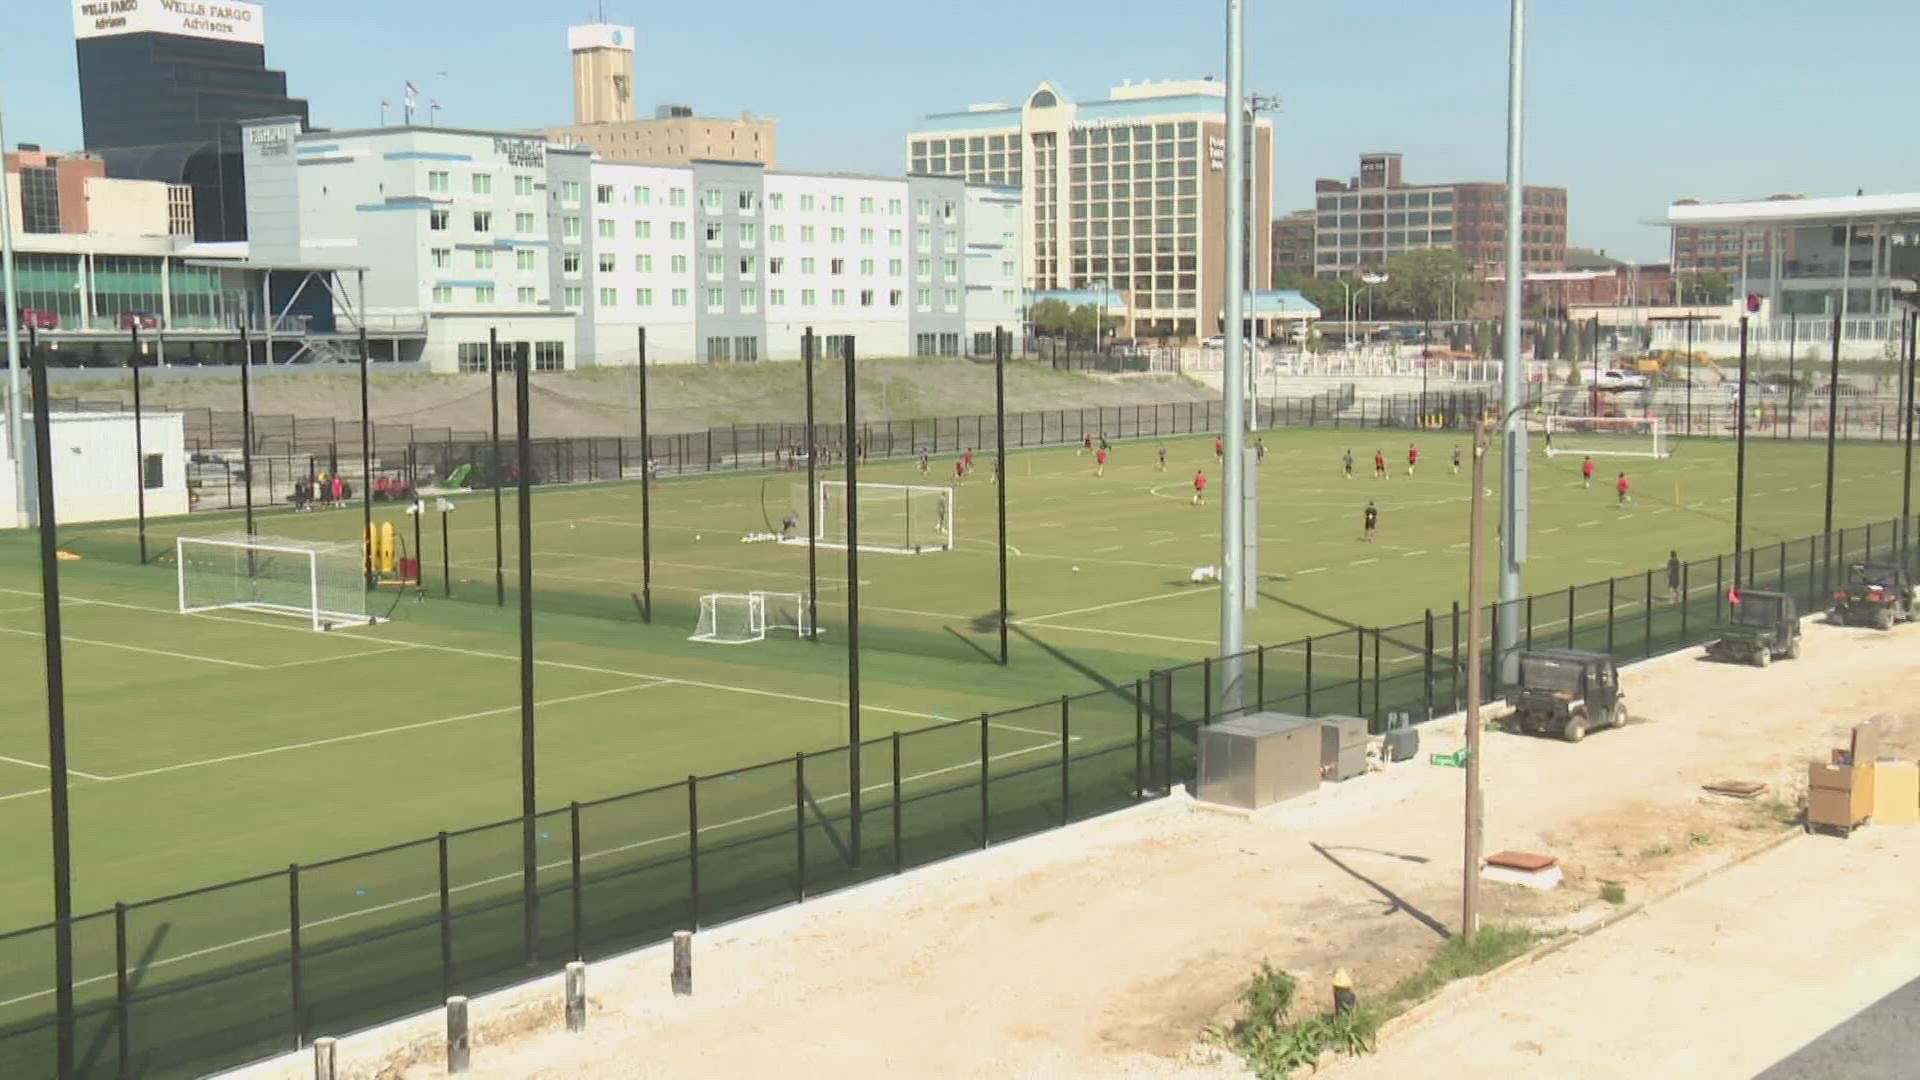 St. Louis City SC has one of the most unique and state of the art setups in all of soccer. And we got an inside look.